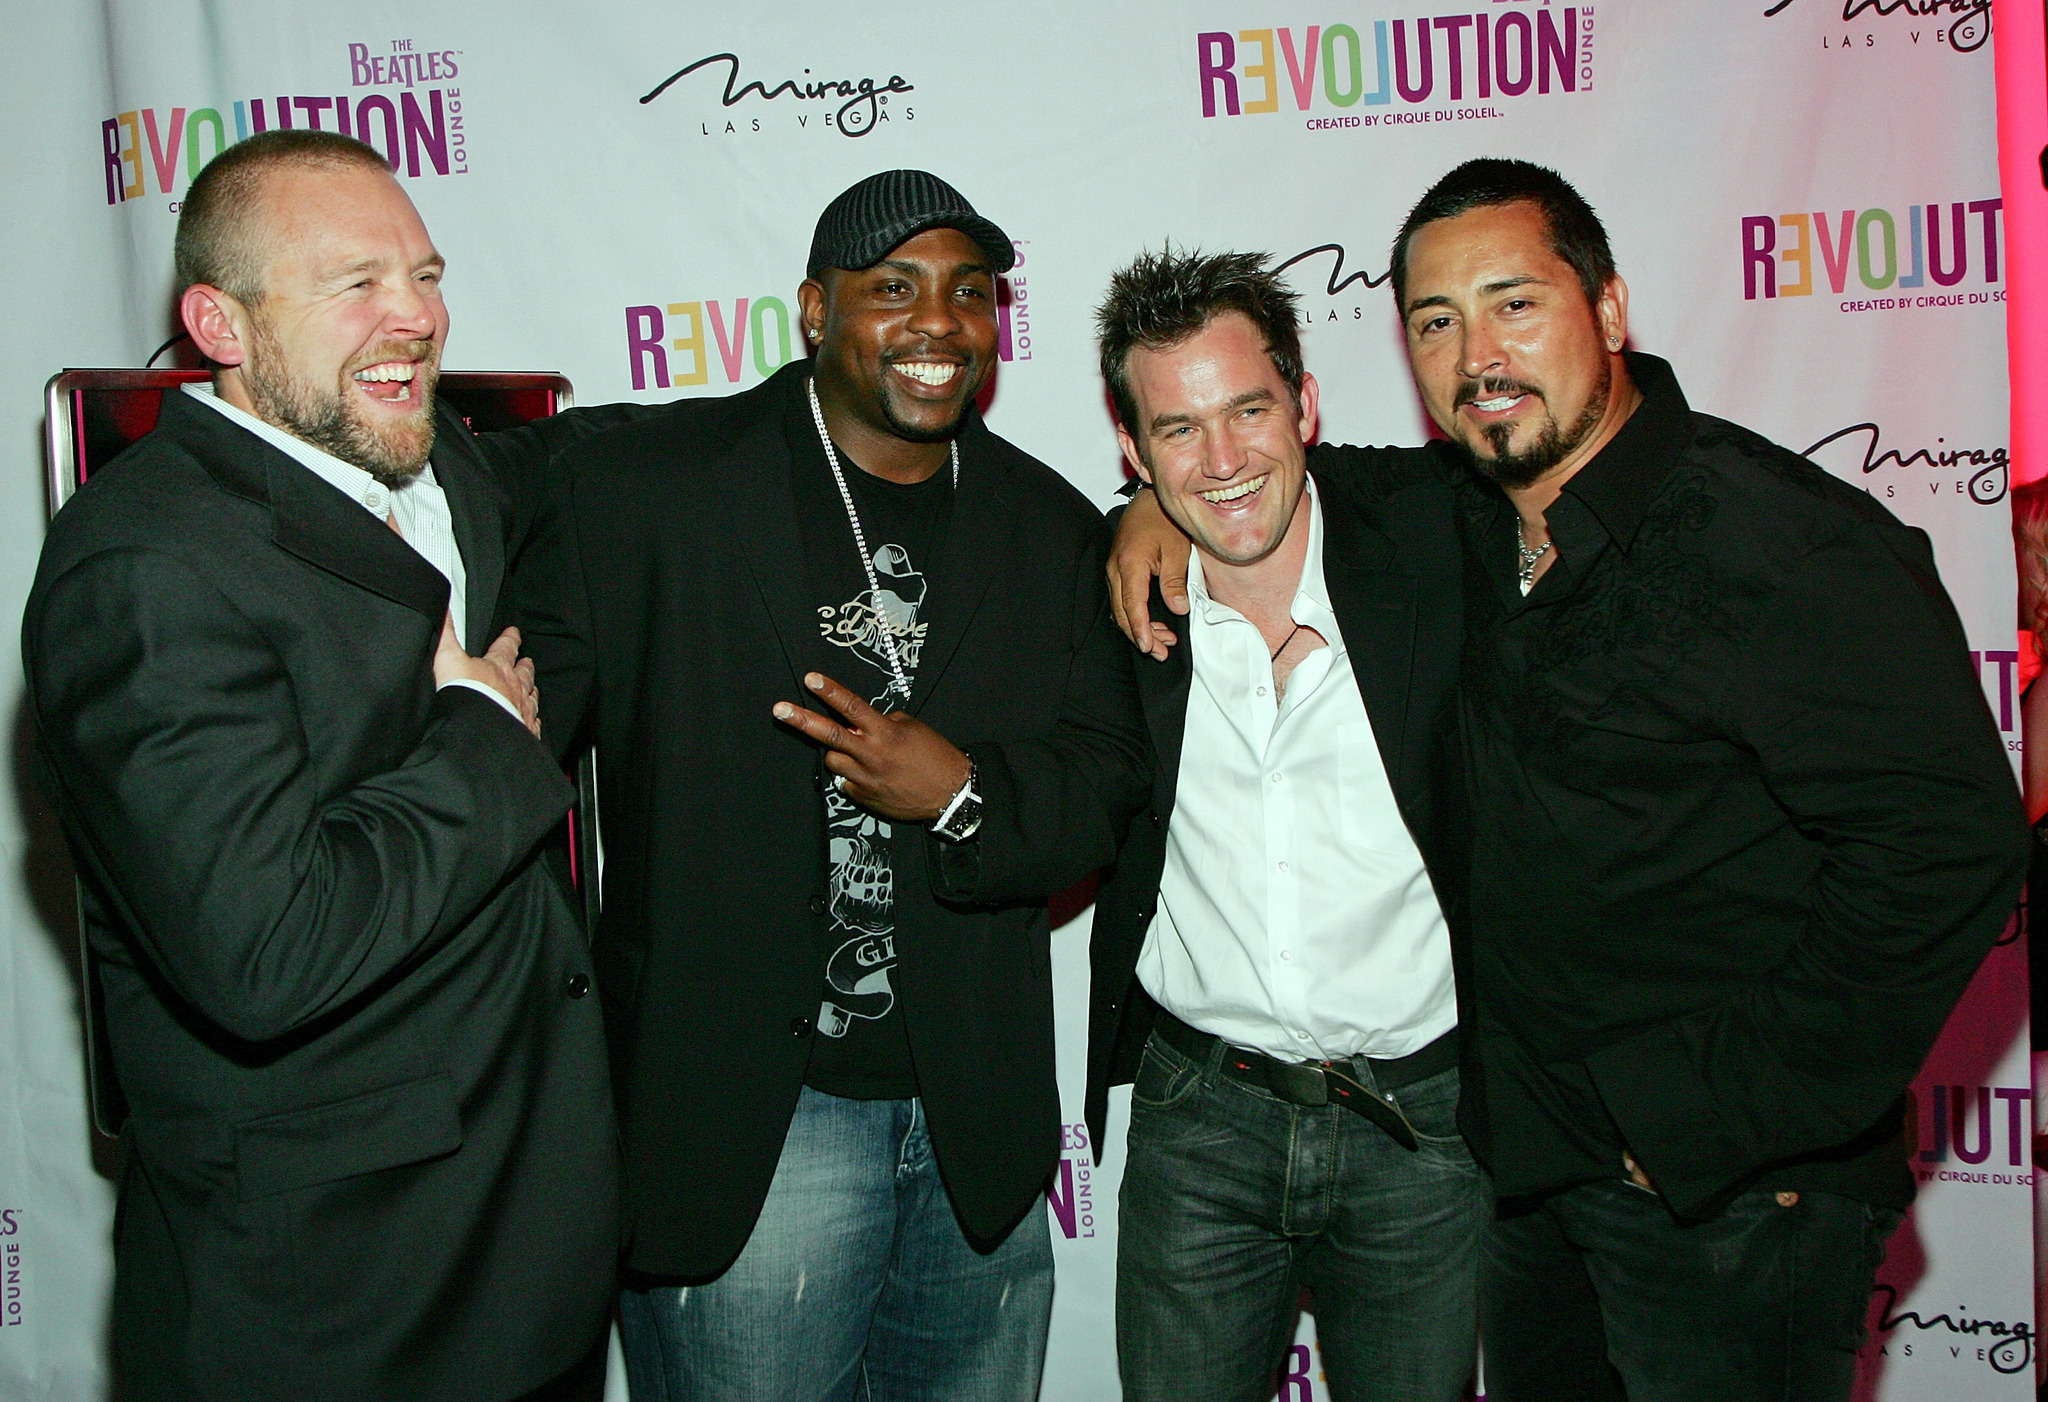 Ben Bray, Joe Carnahan, Maury Sterling and Christopher Michael Holley